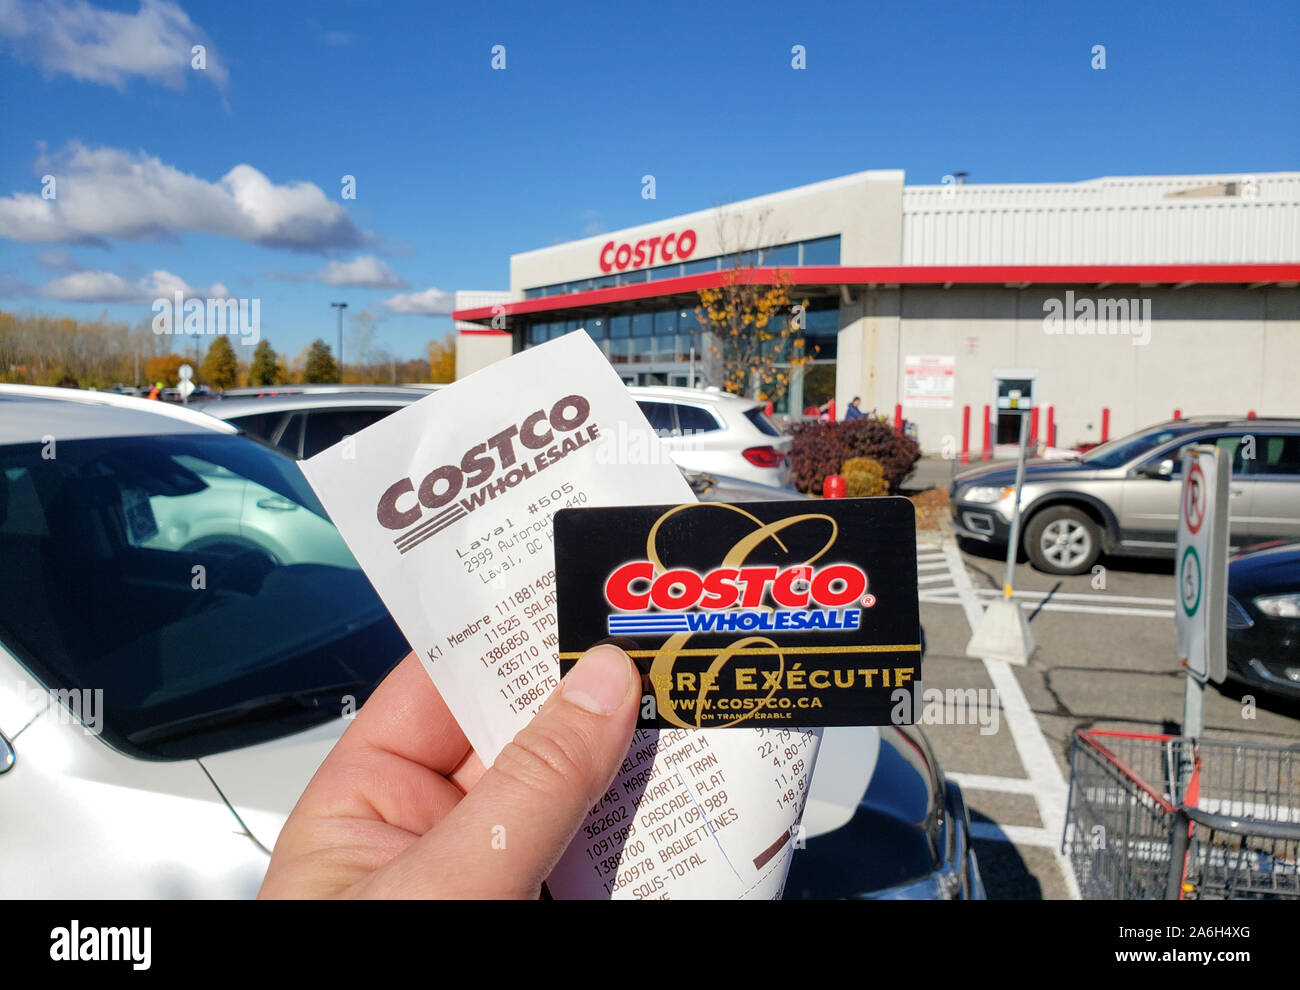 Montreal, Canada - October 26, 2019: A hand holding a receipt and Costco Membership card in Costco warehouse. Costco is an American corporation which Stock Photo